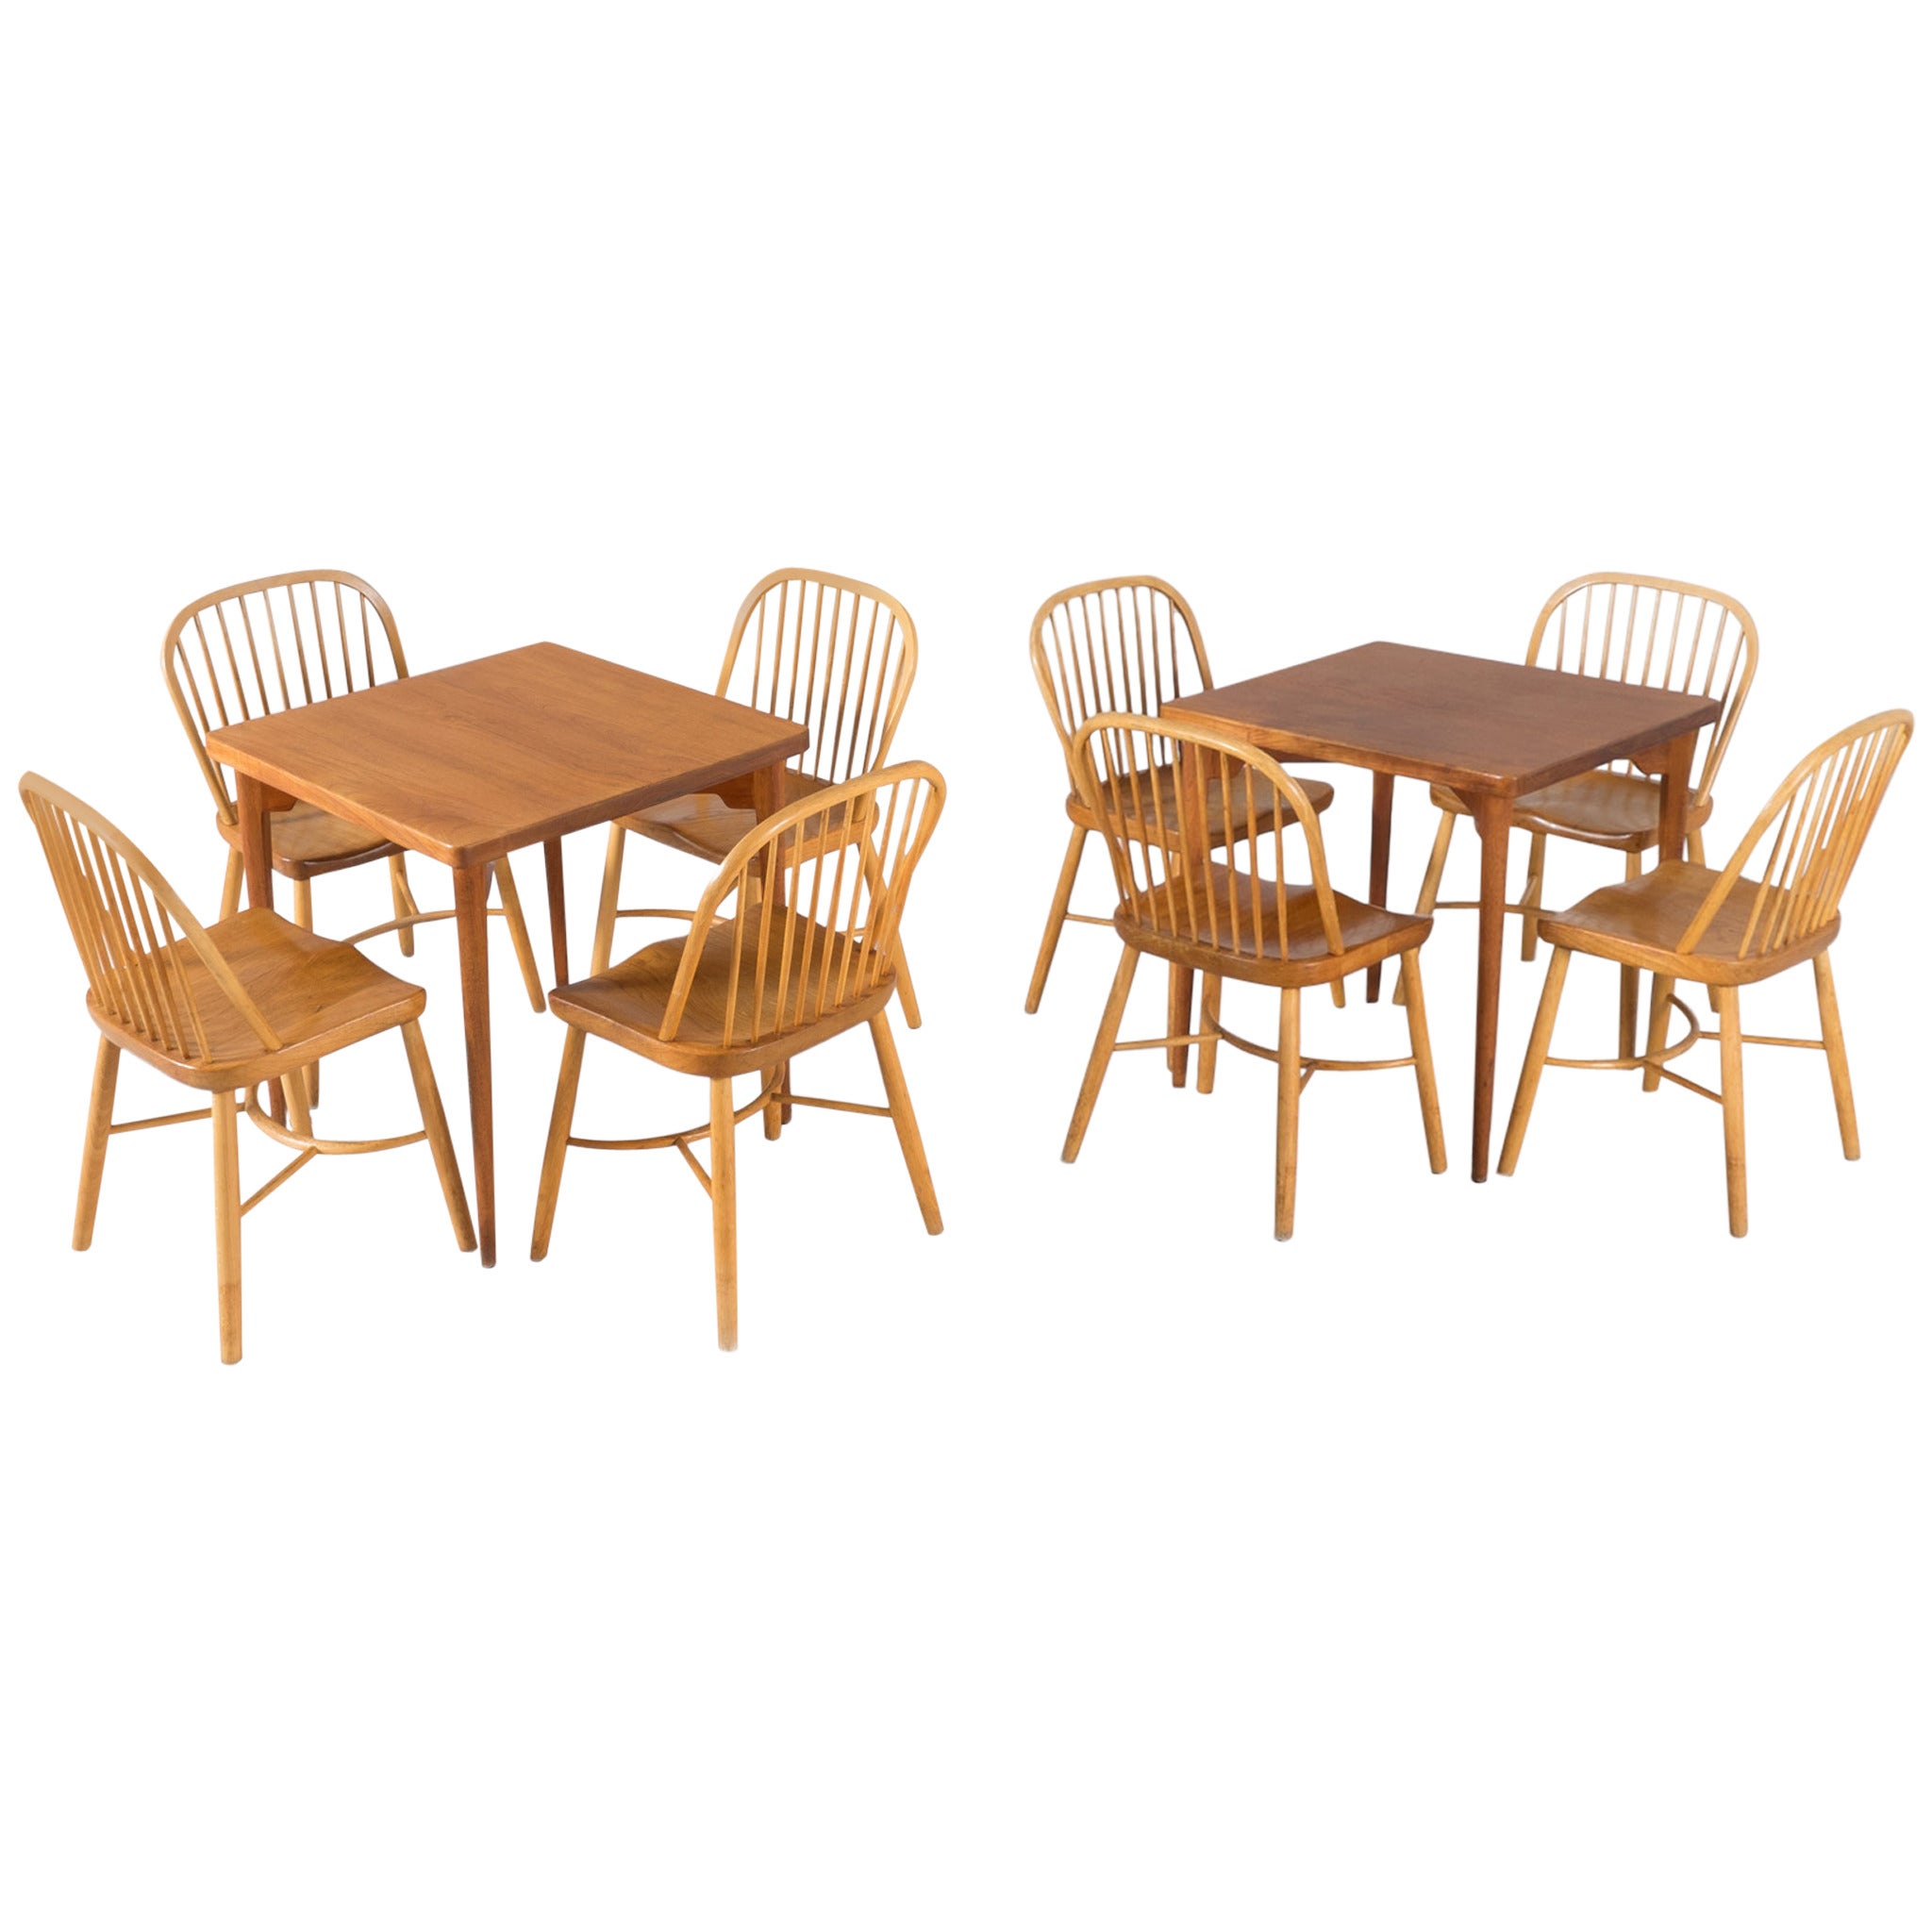 Two Scandinavian Dining Sets by Palle Suenson